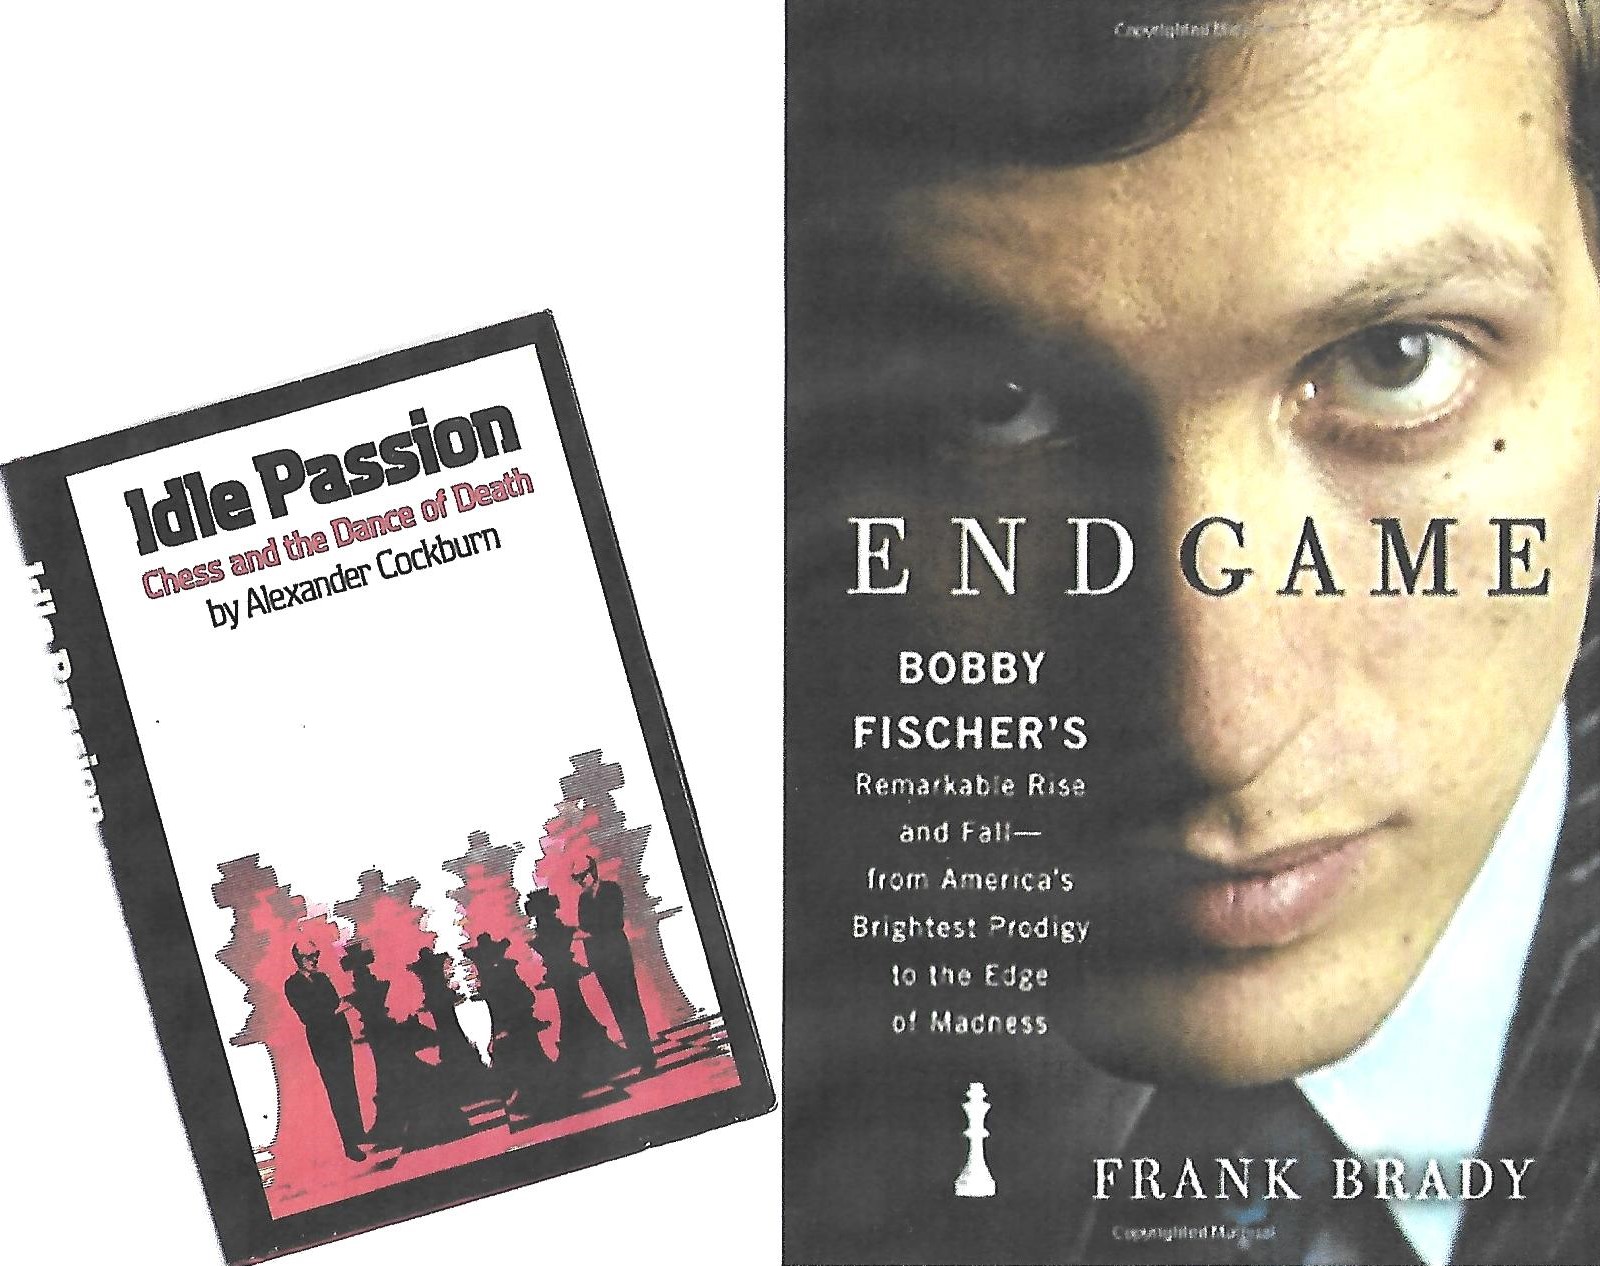 Endgame: Bobby Fischer's Remarkable Rise and Fall - from America's